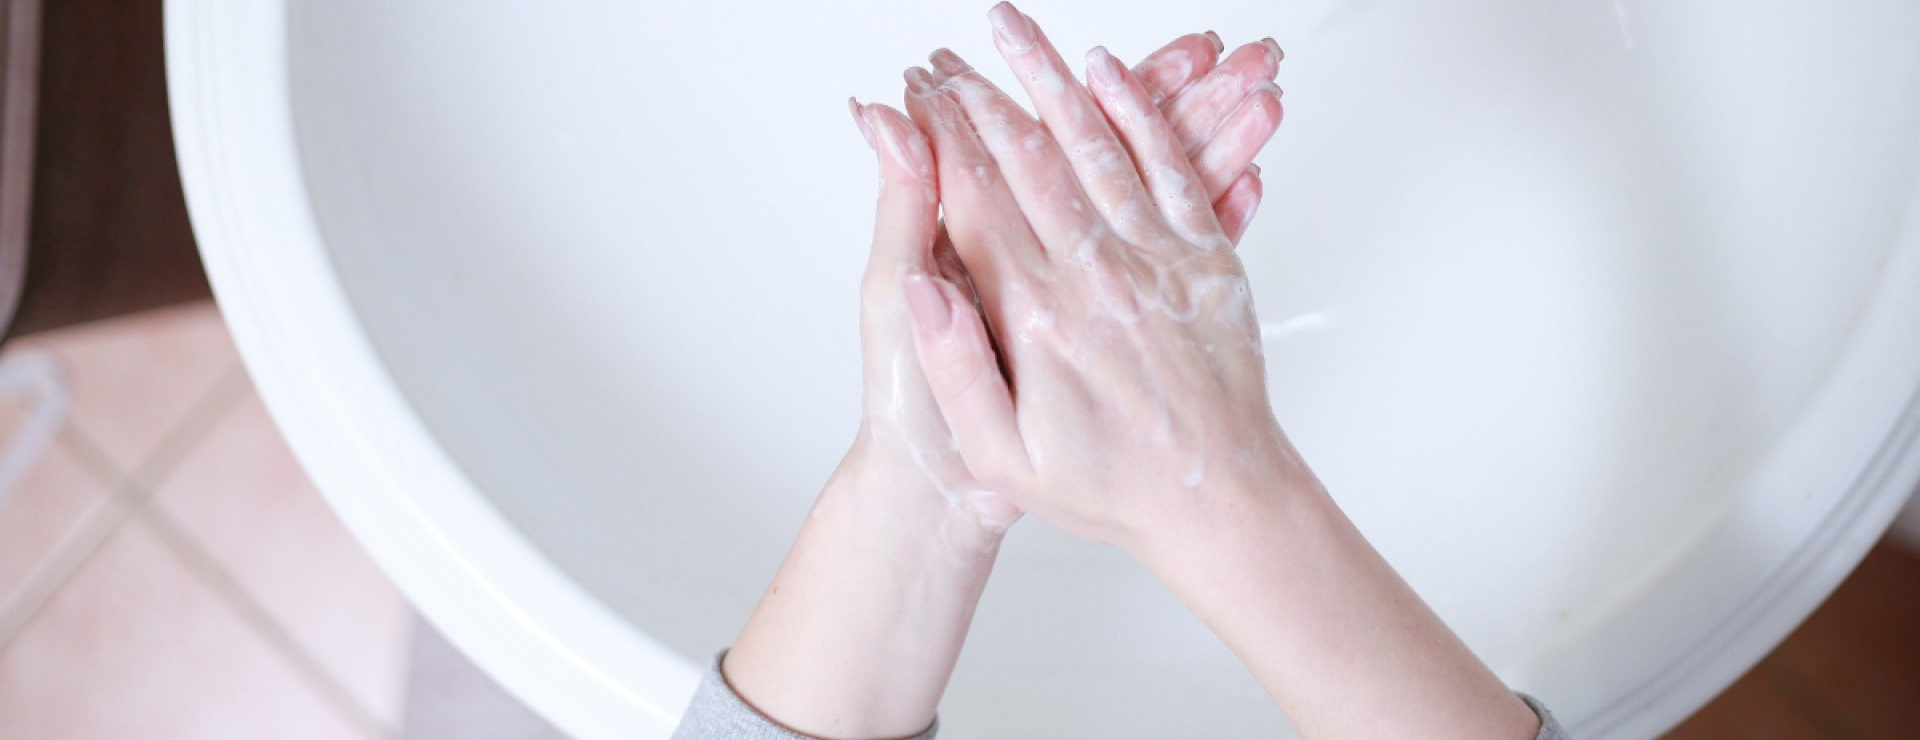 Image of a person washing their hands